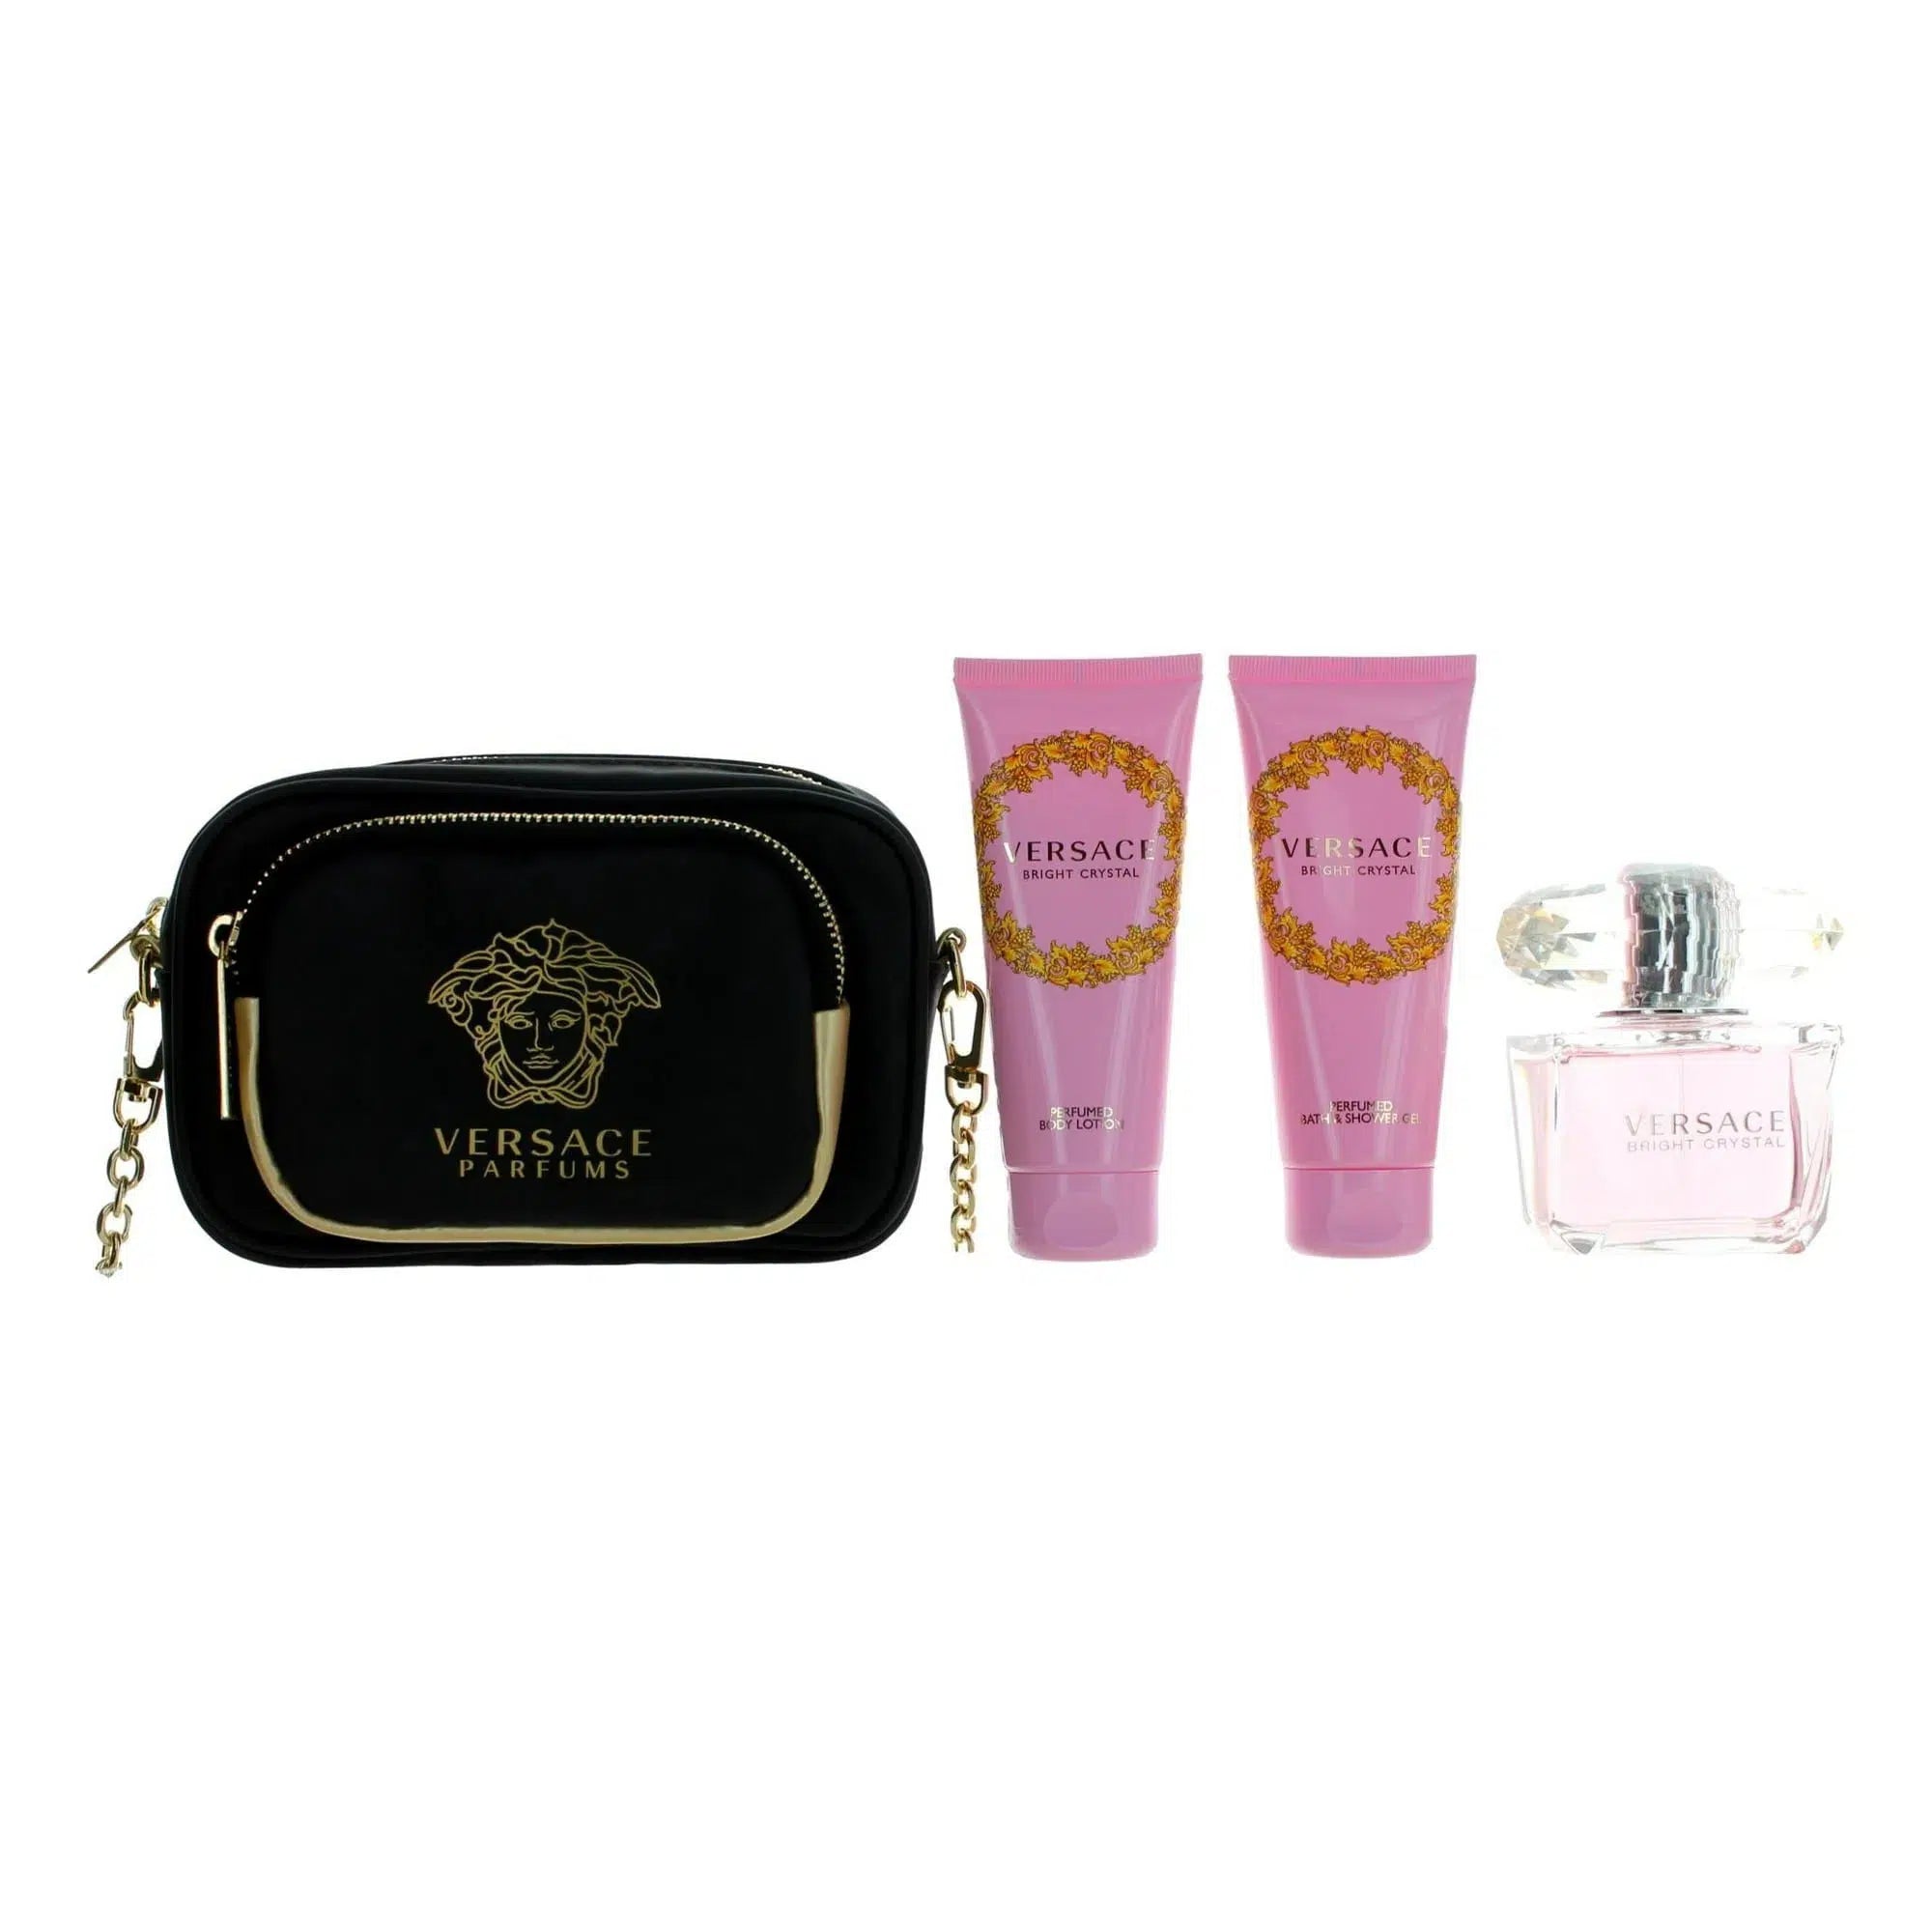 Buy Versace Bright Crystal 3-Piece with Versace Clutch Gift